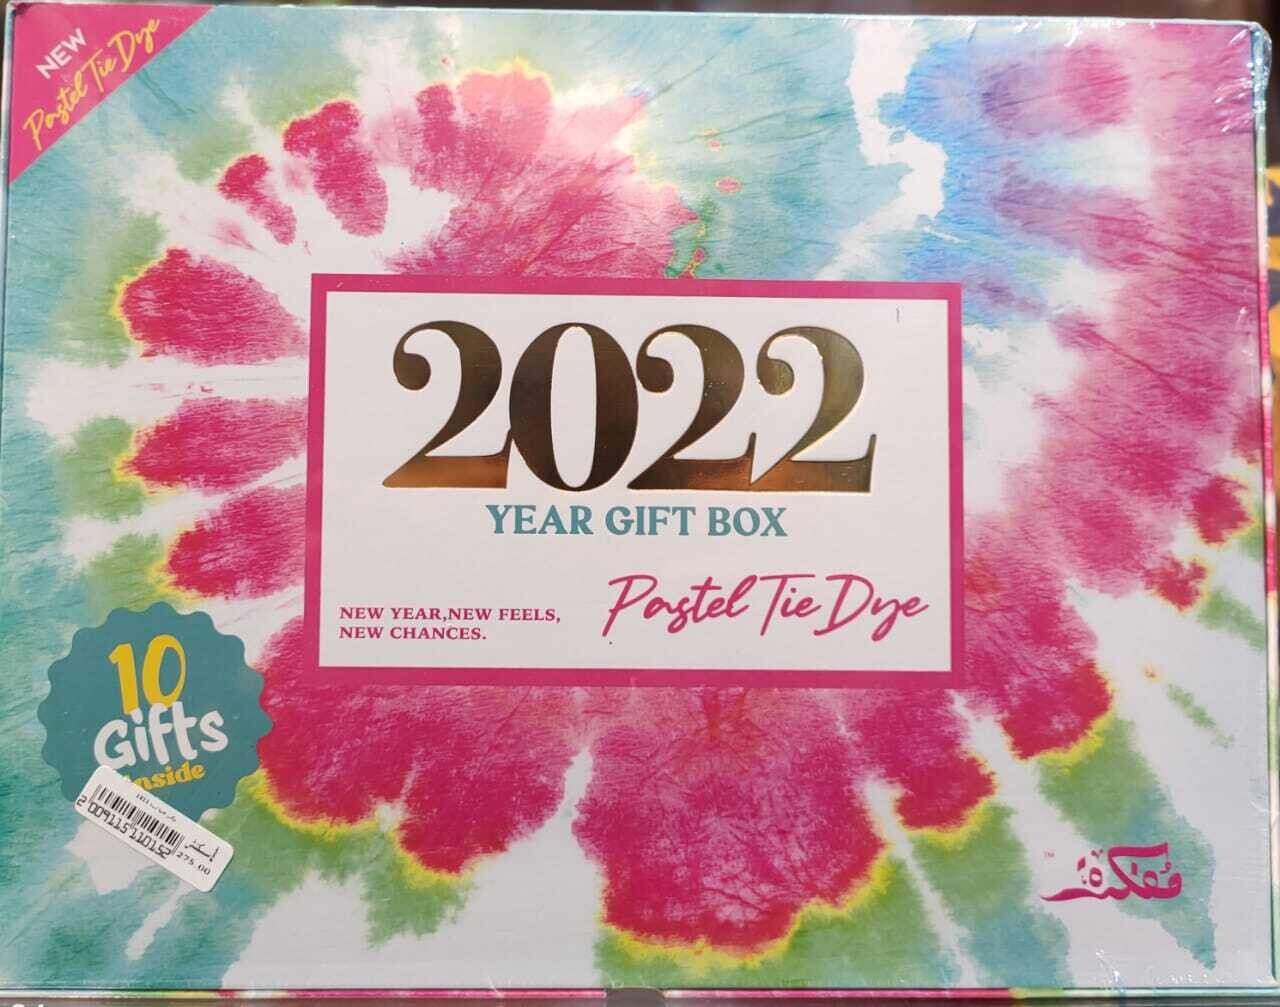 Daily Agenda Gift Box for New Year.